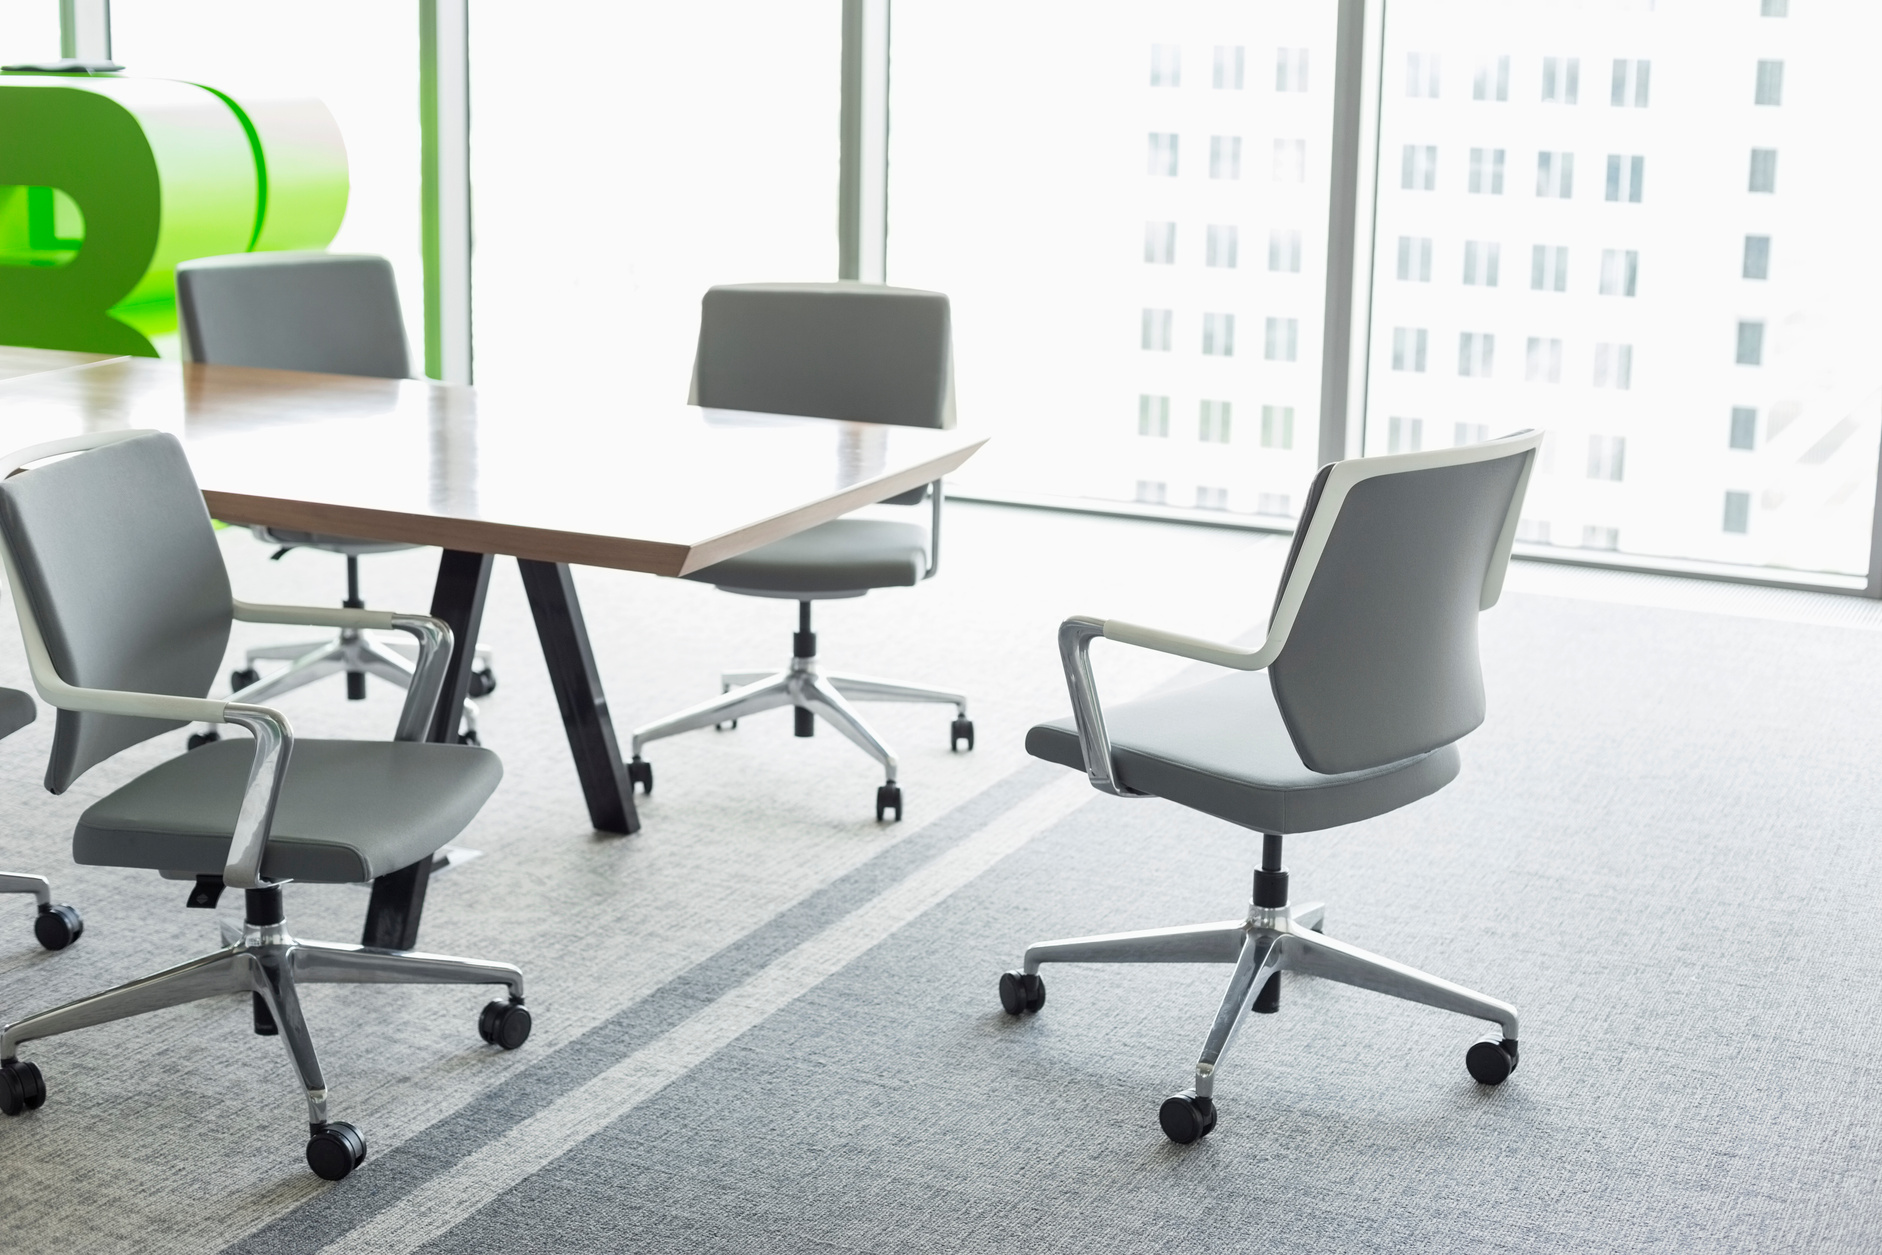 Office chairs at conference table